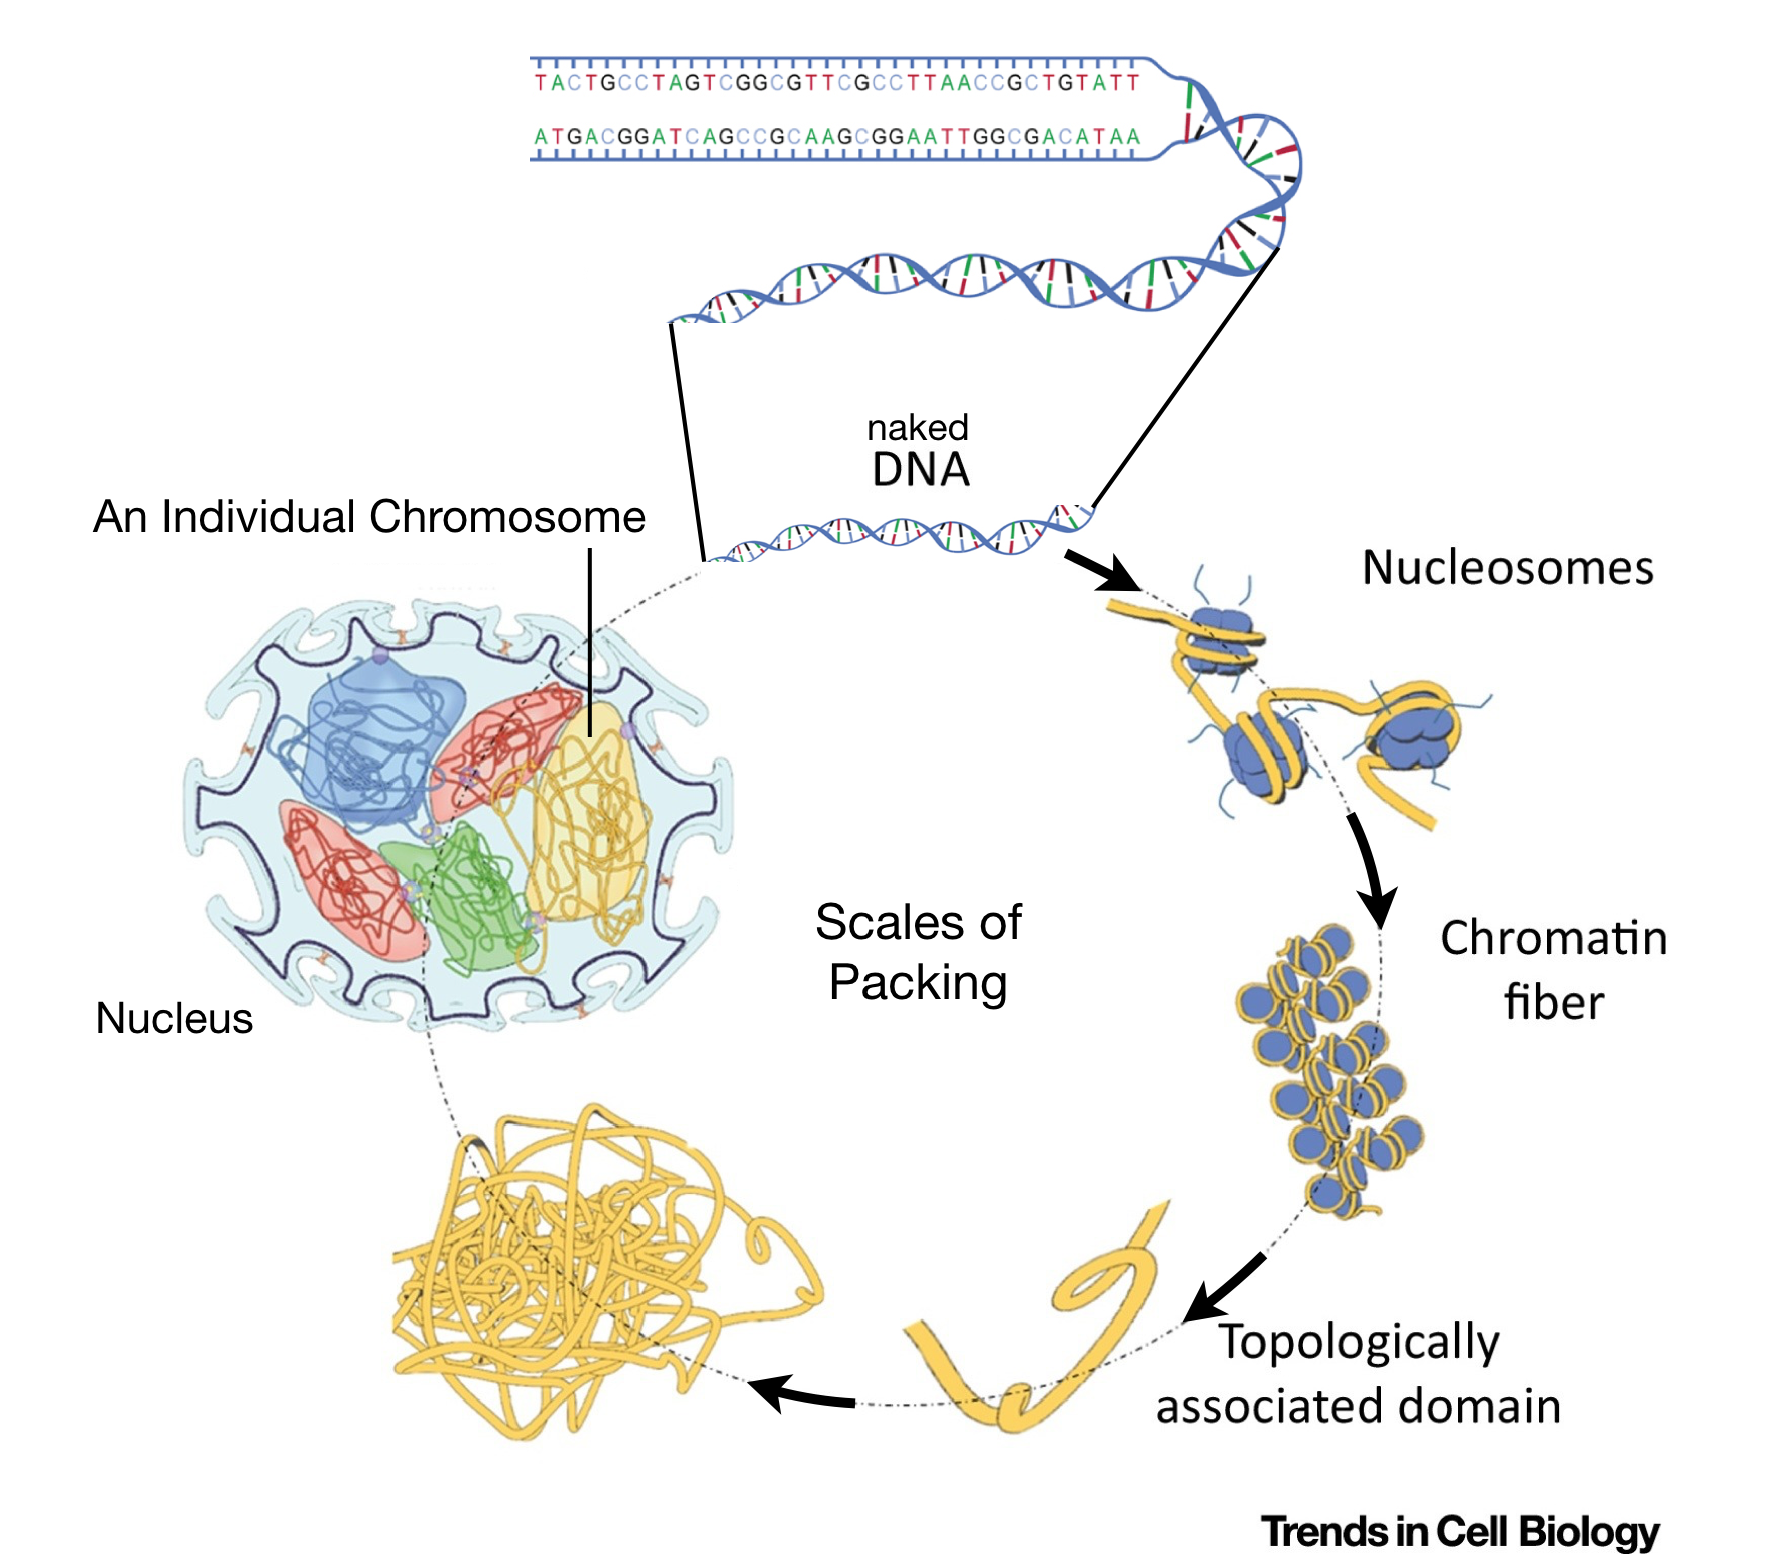 This image is modified from Uhler and Shivashankar, 2017. It shows the various levels of chromosome packing found in nuclei during interphase of the cell cycle. The first level of packing requires an octamer of histone proteins that assemble into a ball-like structure called a *nucleosome*. Naked DNA wraps around these octamers forming 'beads on a string'. Additional levels of packing into chromatin fibers and topological associated domains requires additional proteins. Individual chromosomes (23 pairs in humans) are then carefully orgnanized within the cell nucleus in a cell type-dependent manner.